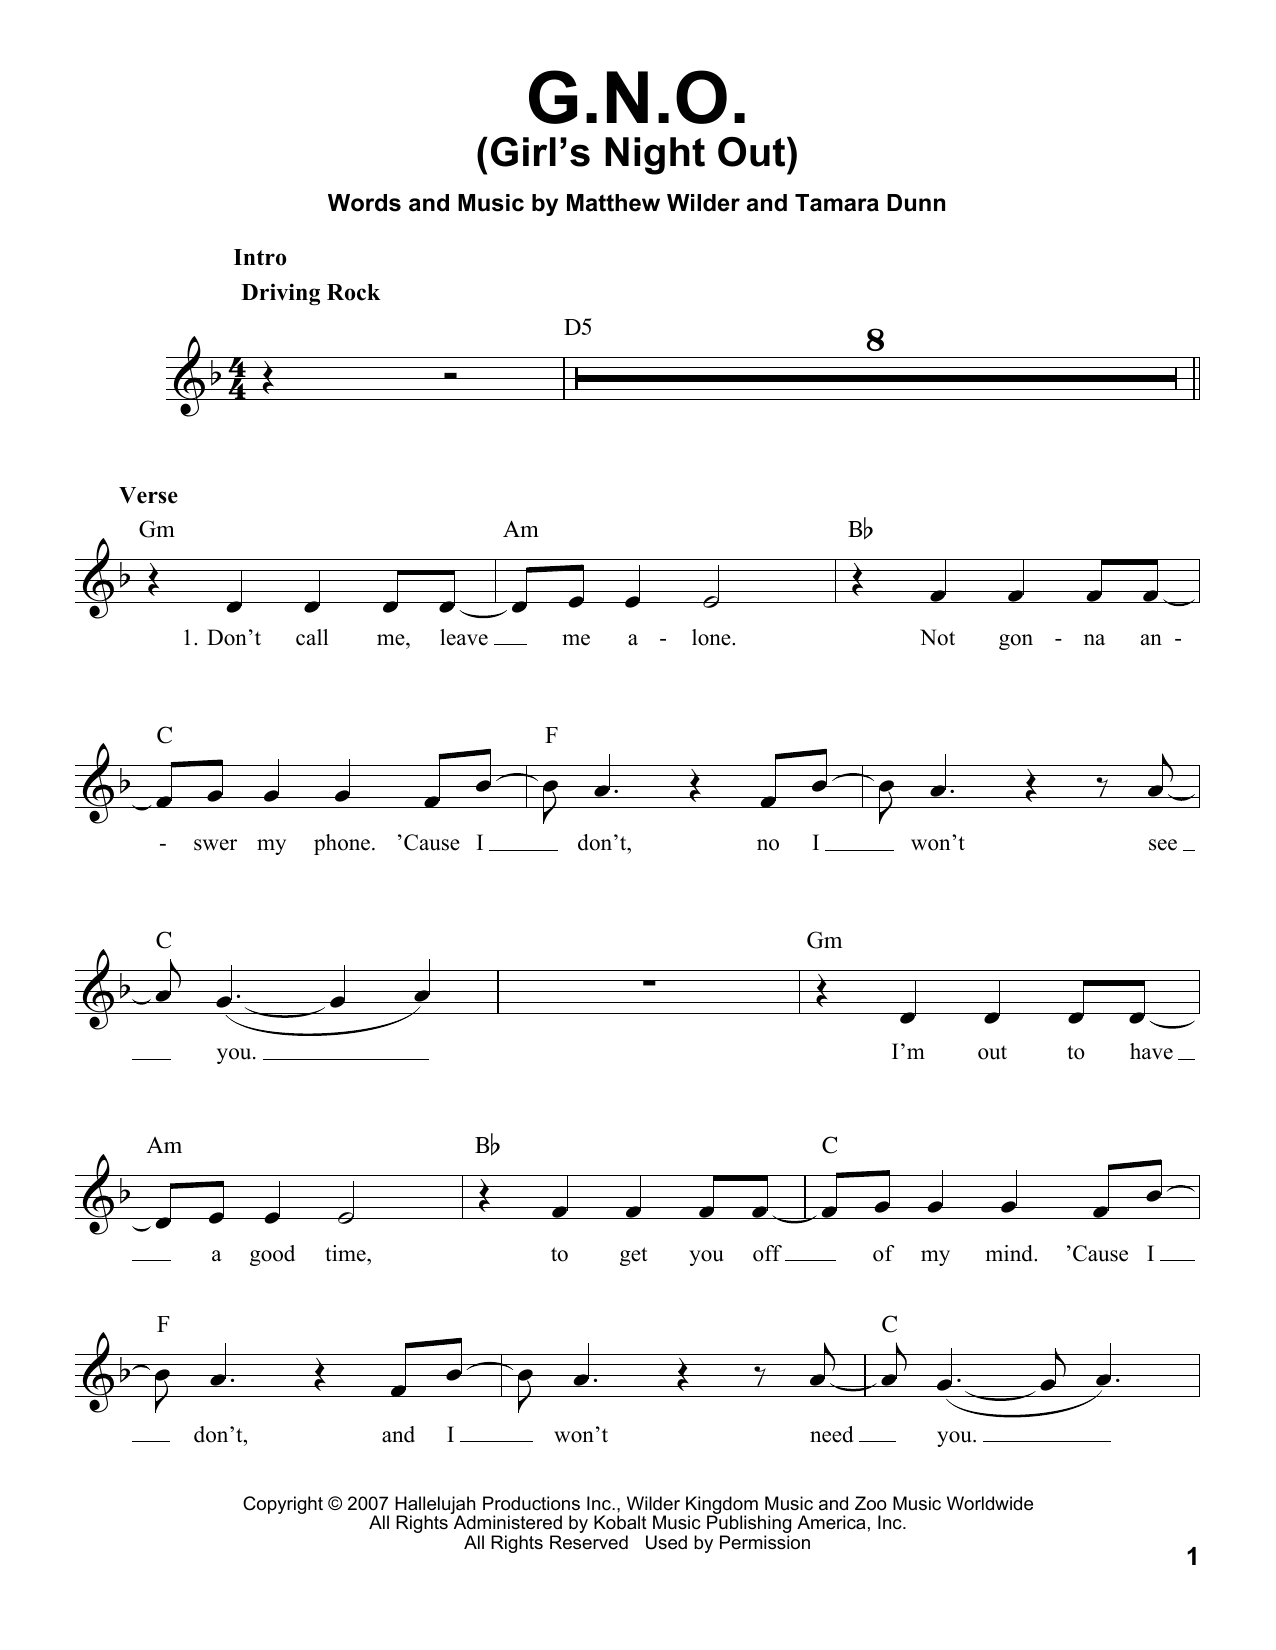 Download Miley Cyrus G.N.O. (Girl's Night Out) Sheet Music